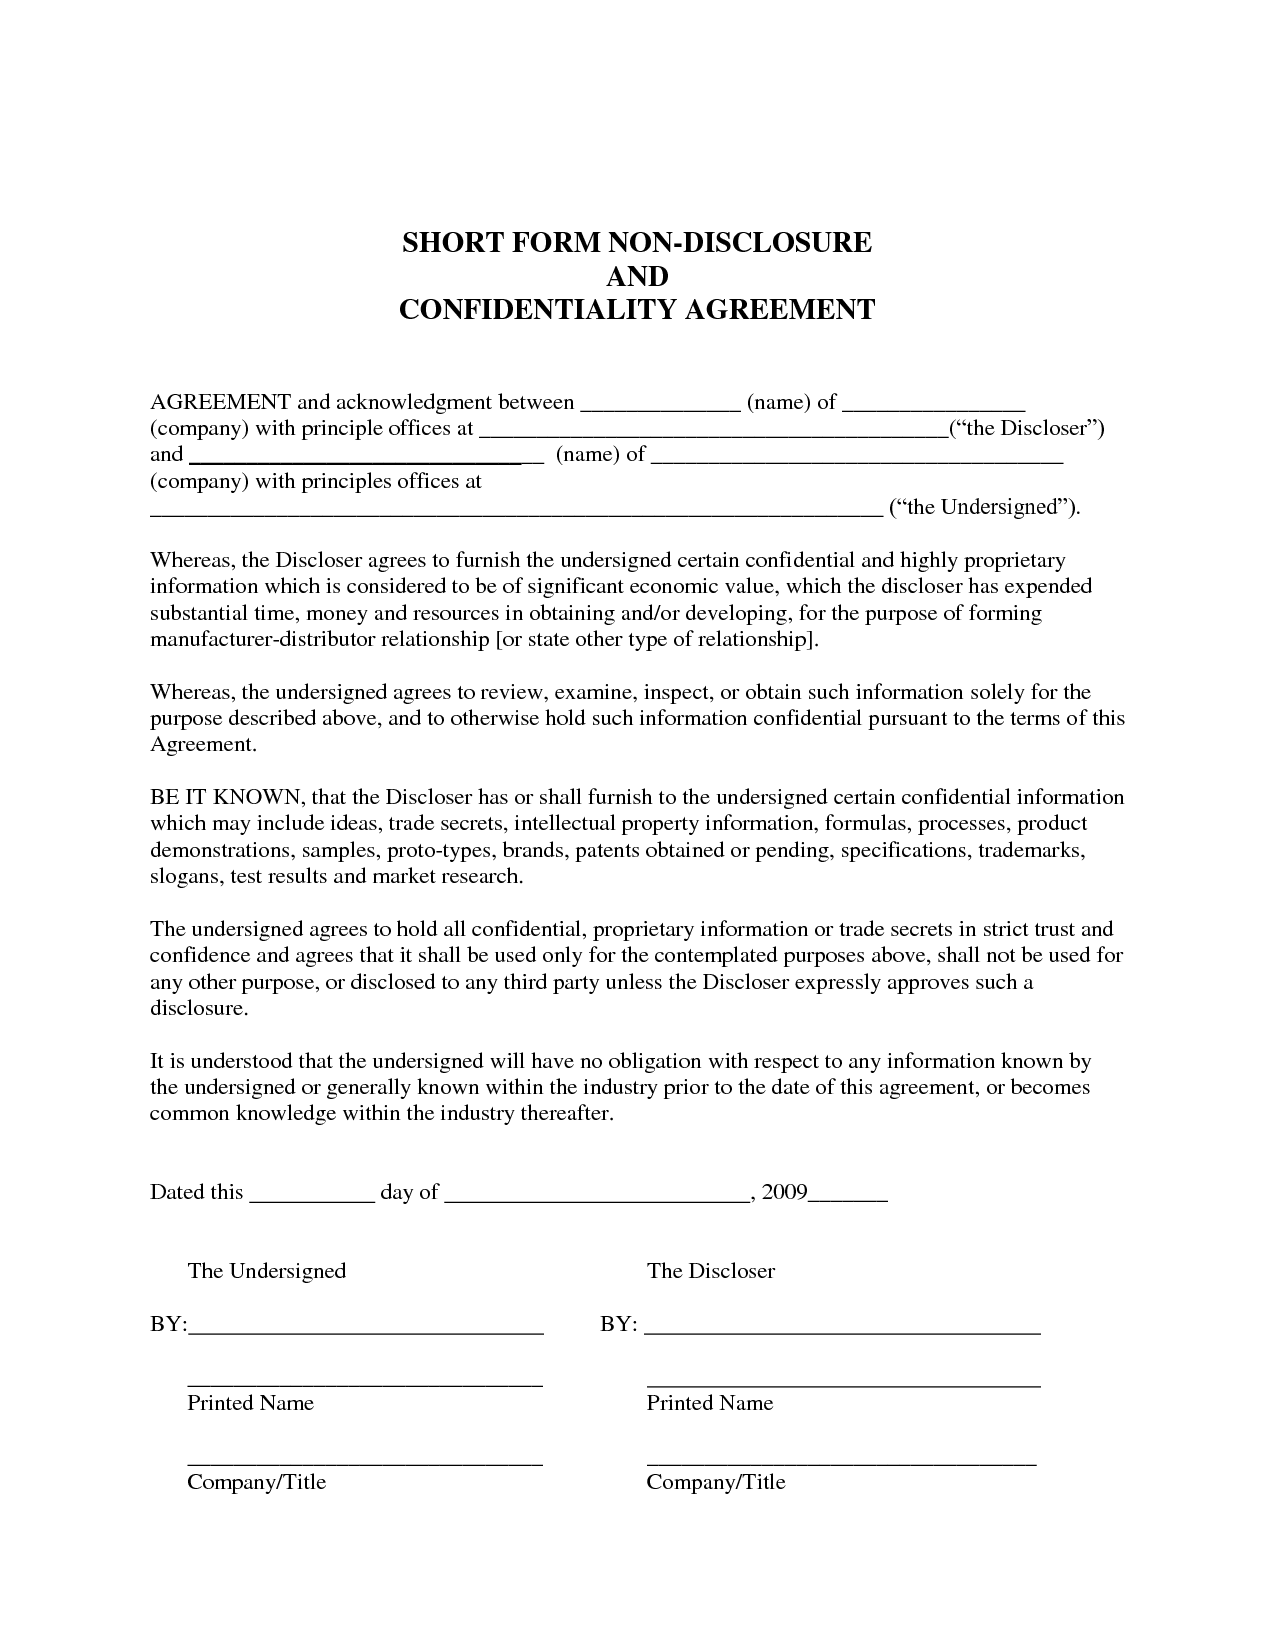 Sample Non Disclosure Agreement | Confidentiality Agreement Sample 